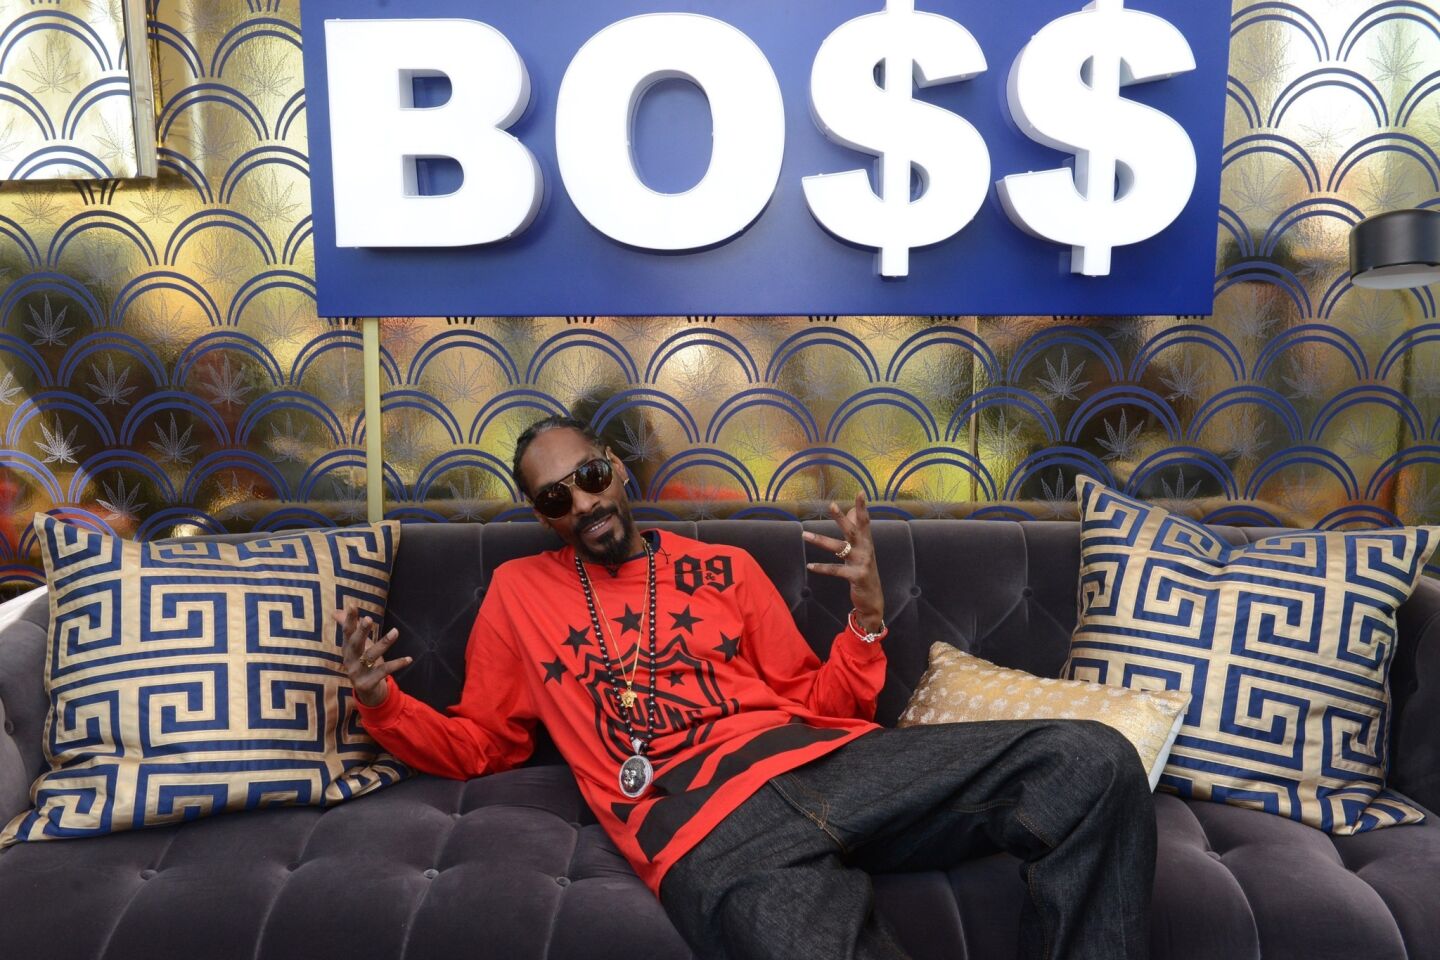 Snoop Dogg attends Airbnb's Snoop Dogg Wake And Bake Event.